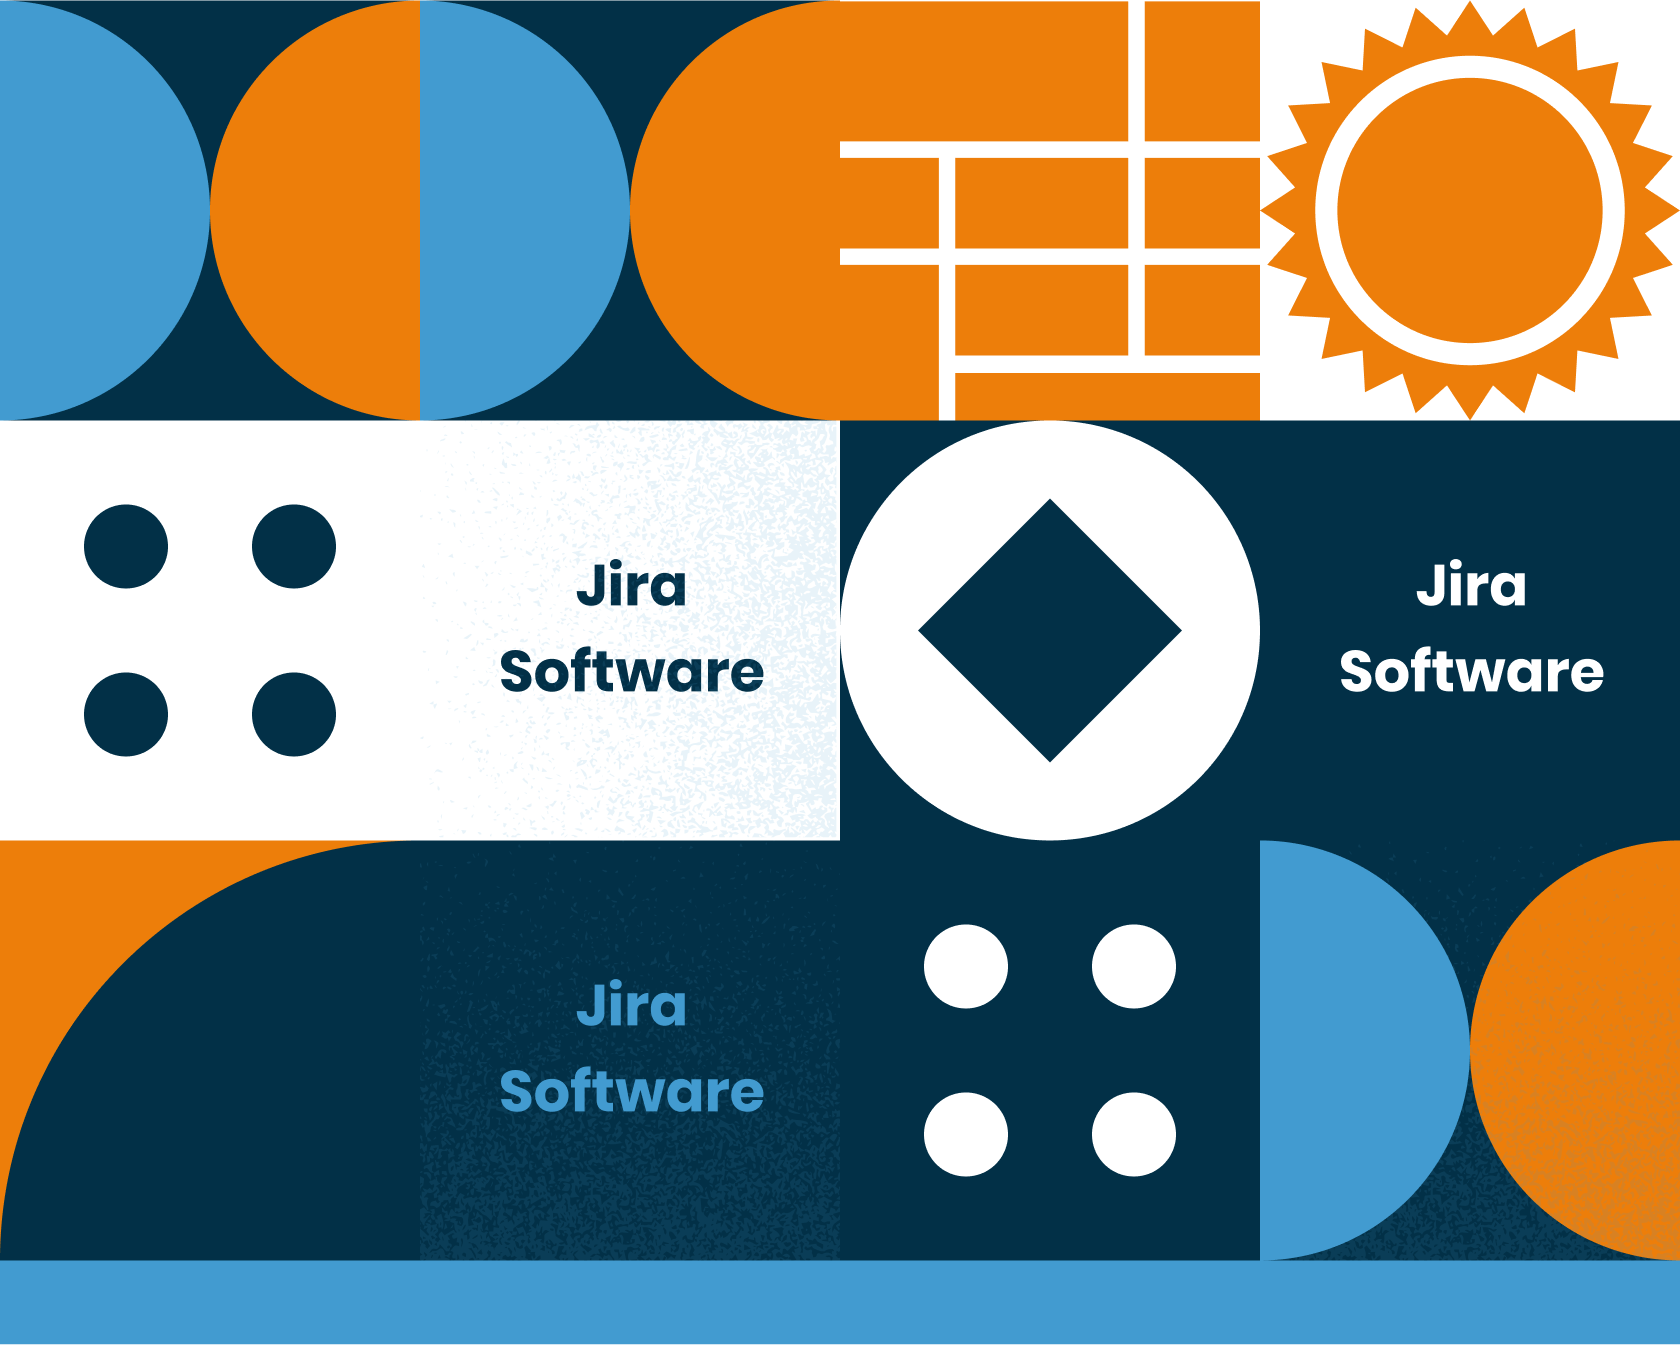 A team of developers using Jira Software to track progress on a software development project